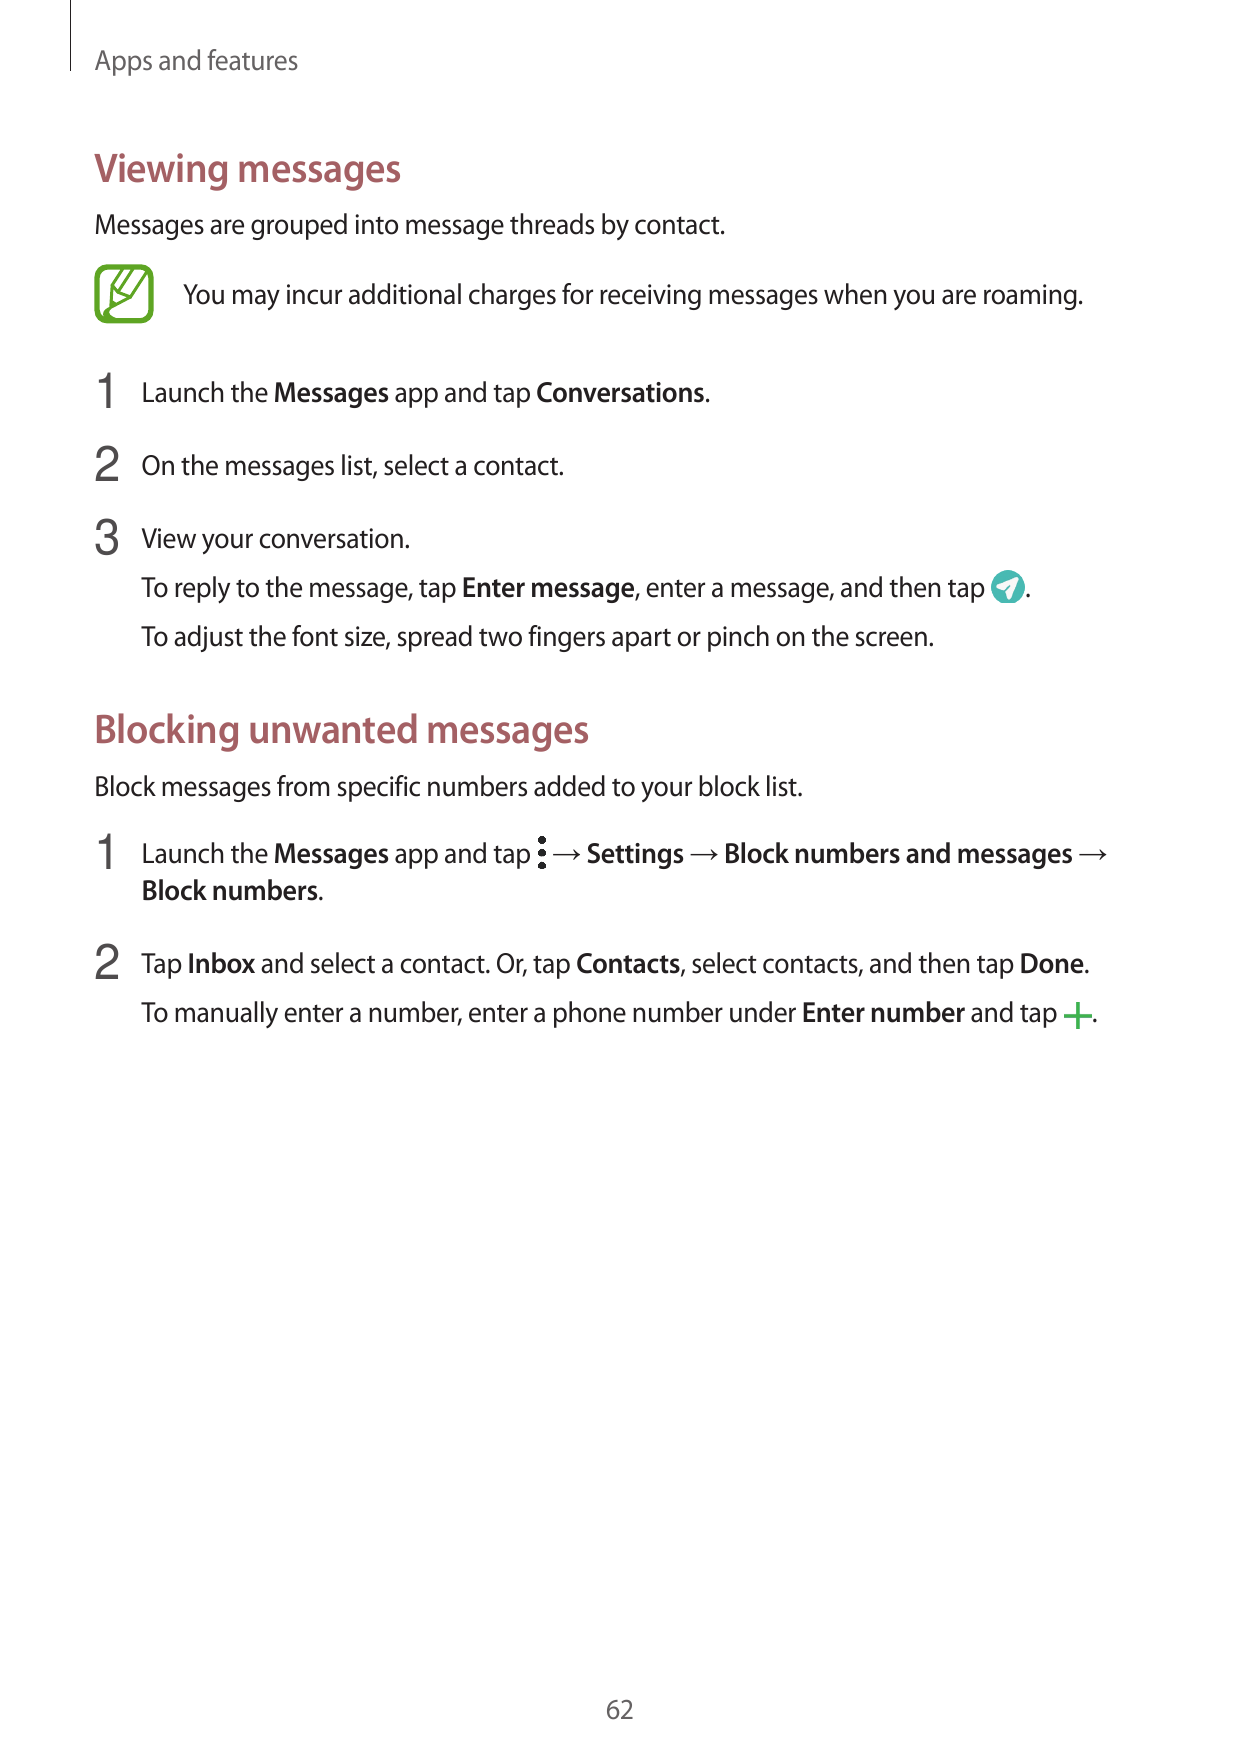 Apps and featuresViewing messagesMessages are grouped into message threads by contact.You may incur additional charges for recei